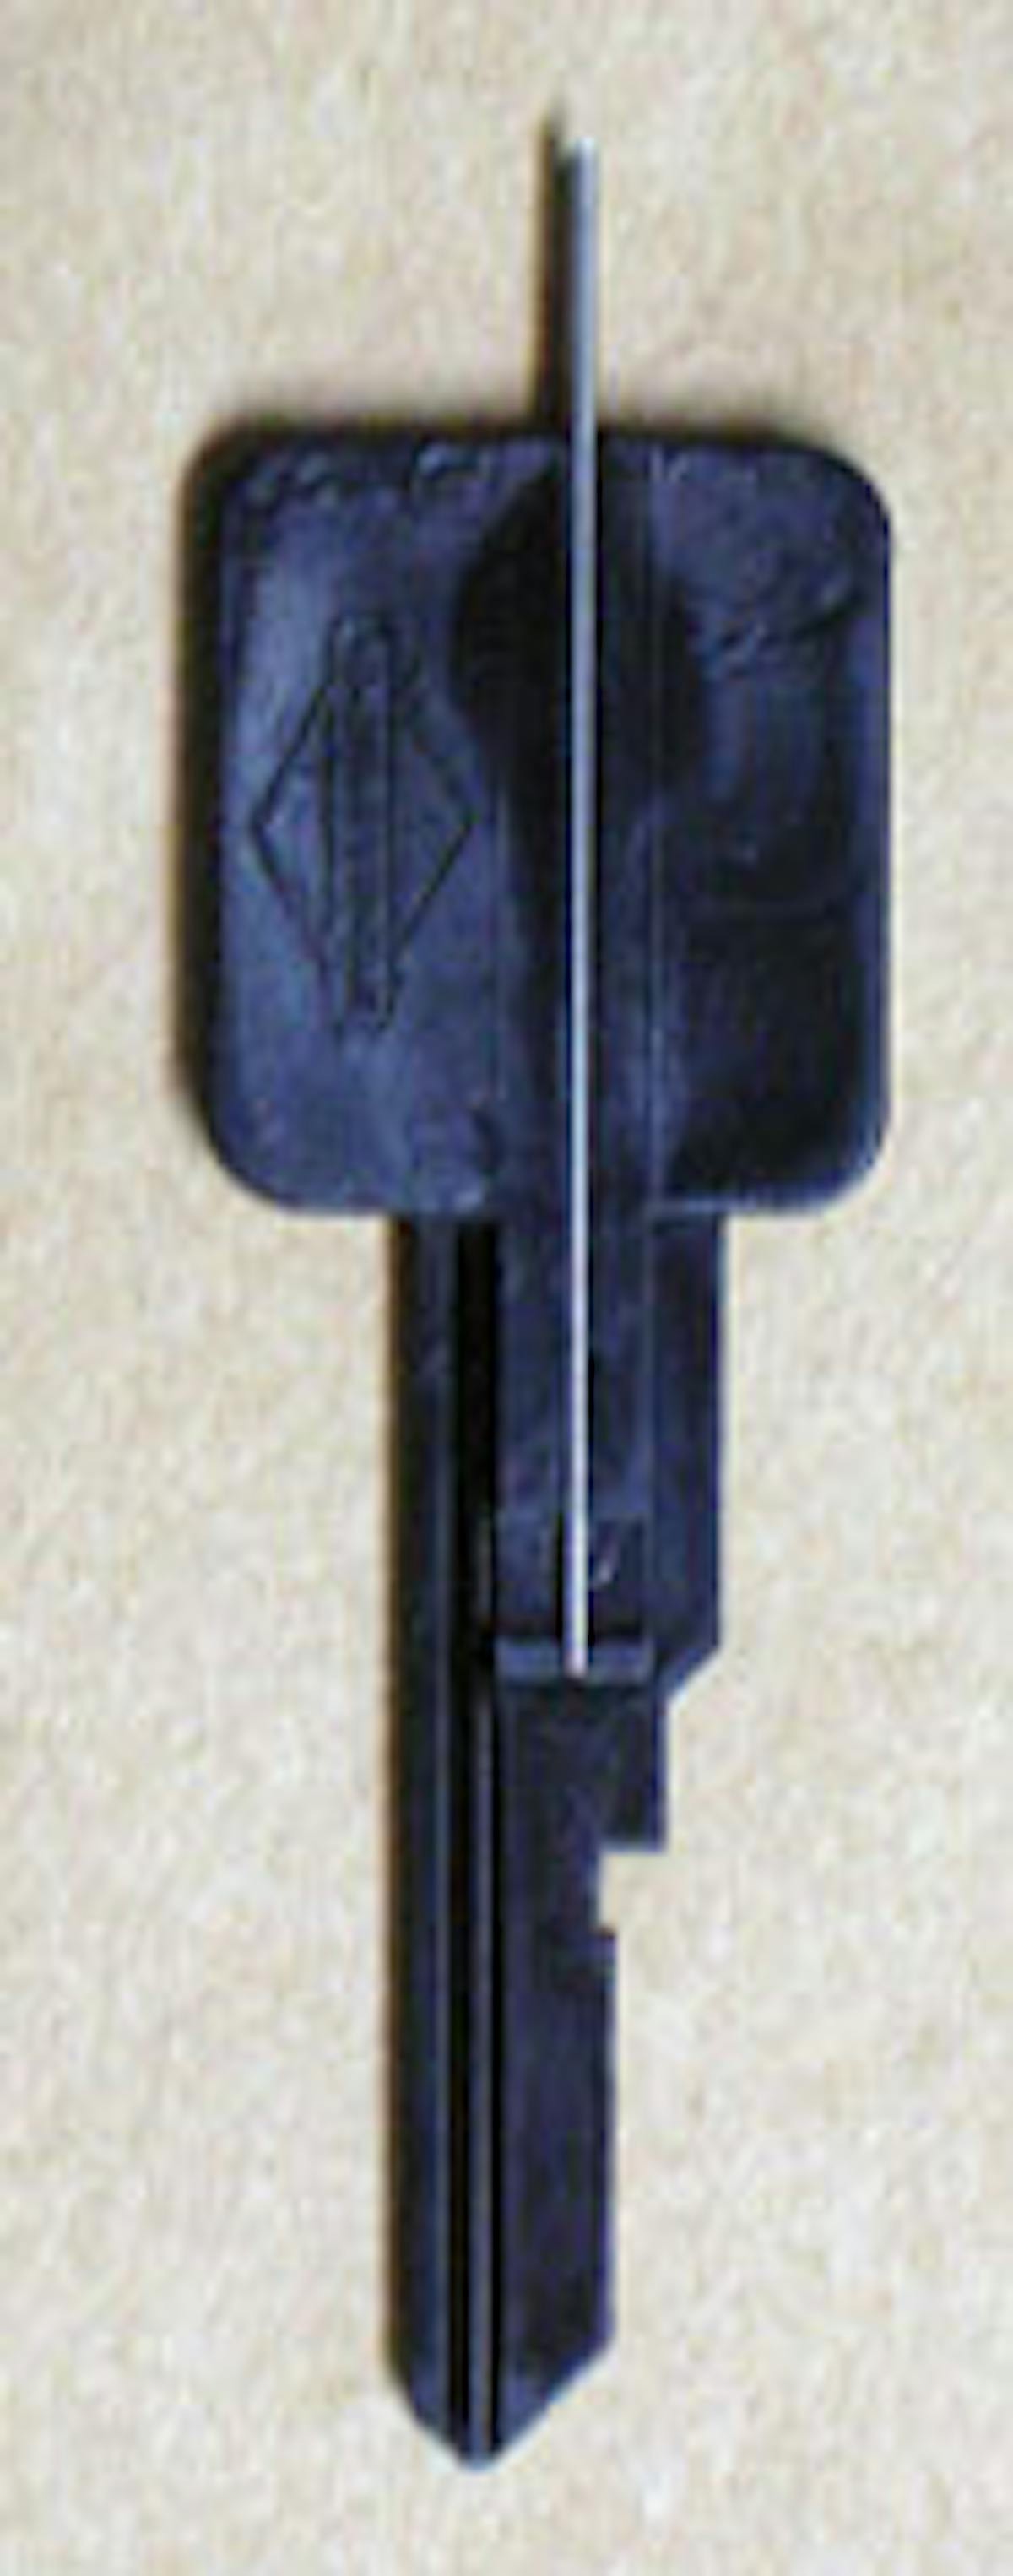 STRATTEC single-sided adapter key.